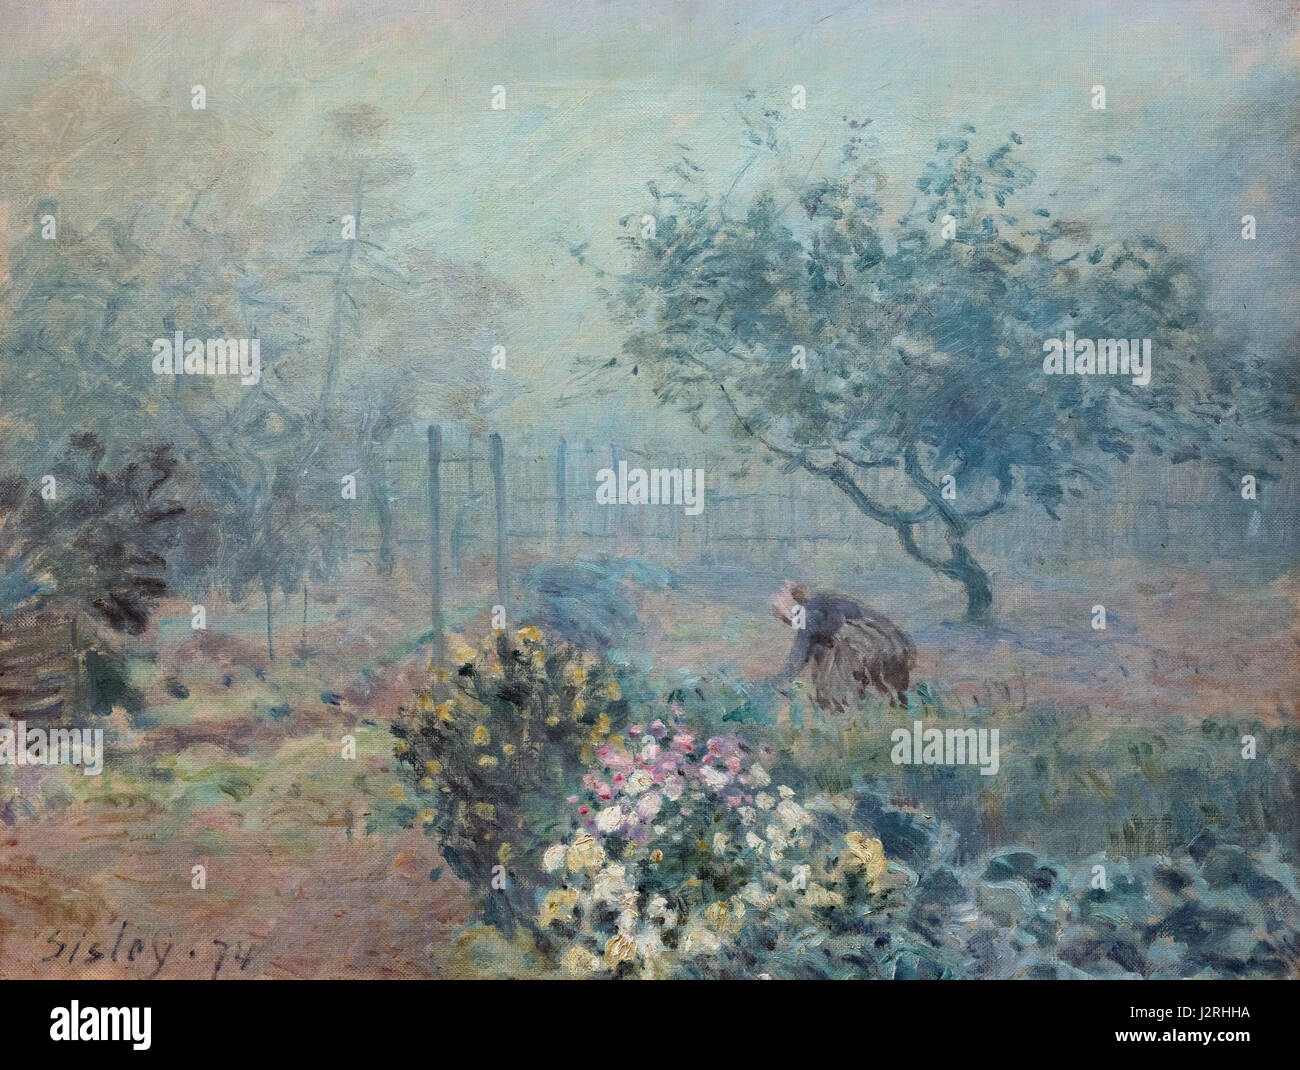 Alfred Sisley. Painting entitled 'Le Brouillard, Voisins' by Alfred Sisley (1839-1899), oil on canvas, 1874 Stock Photo